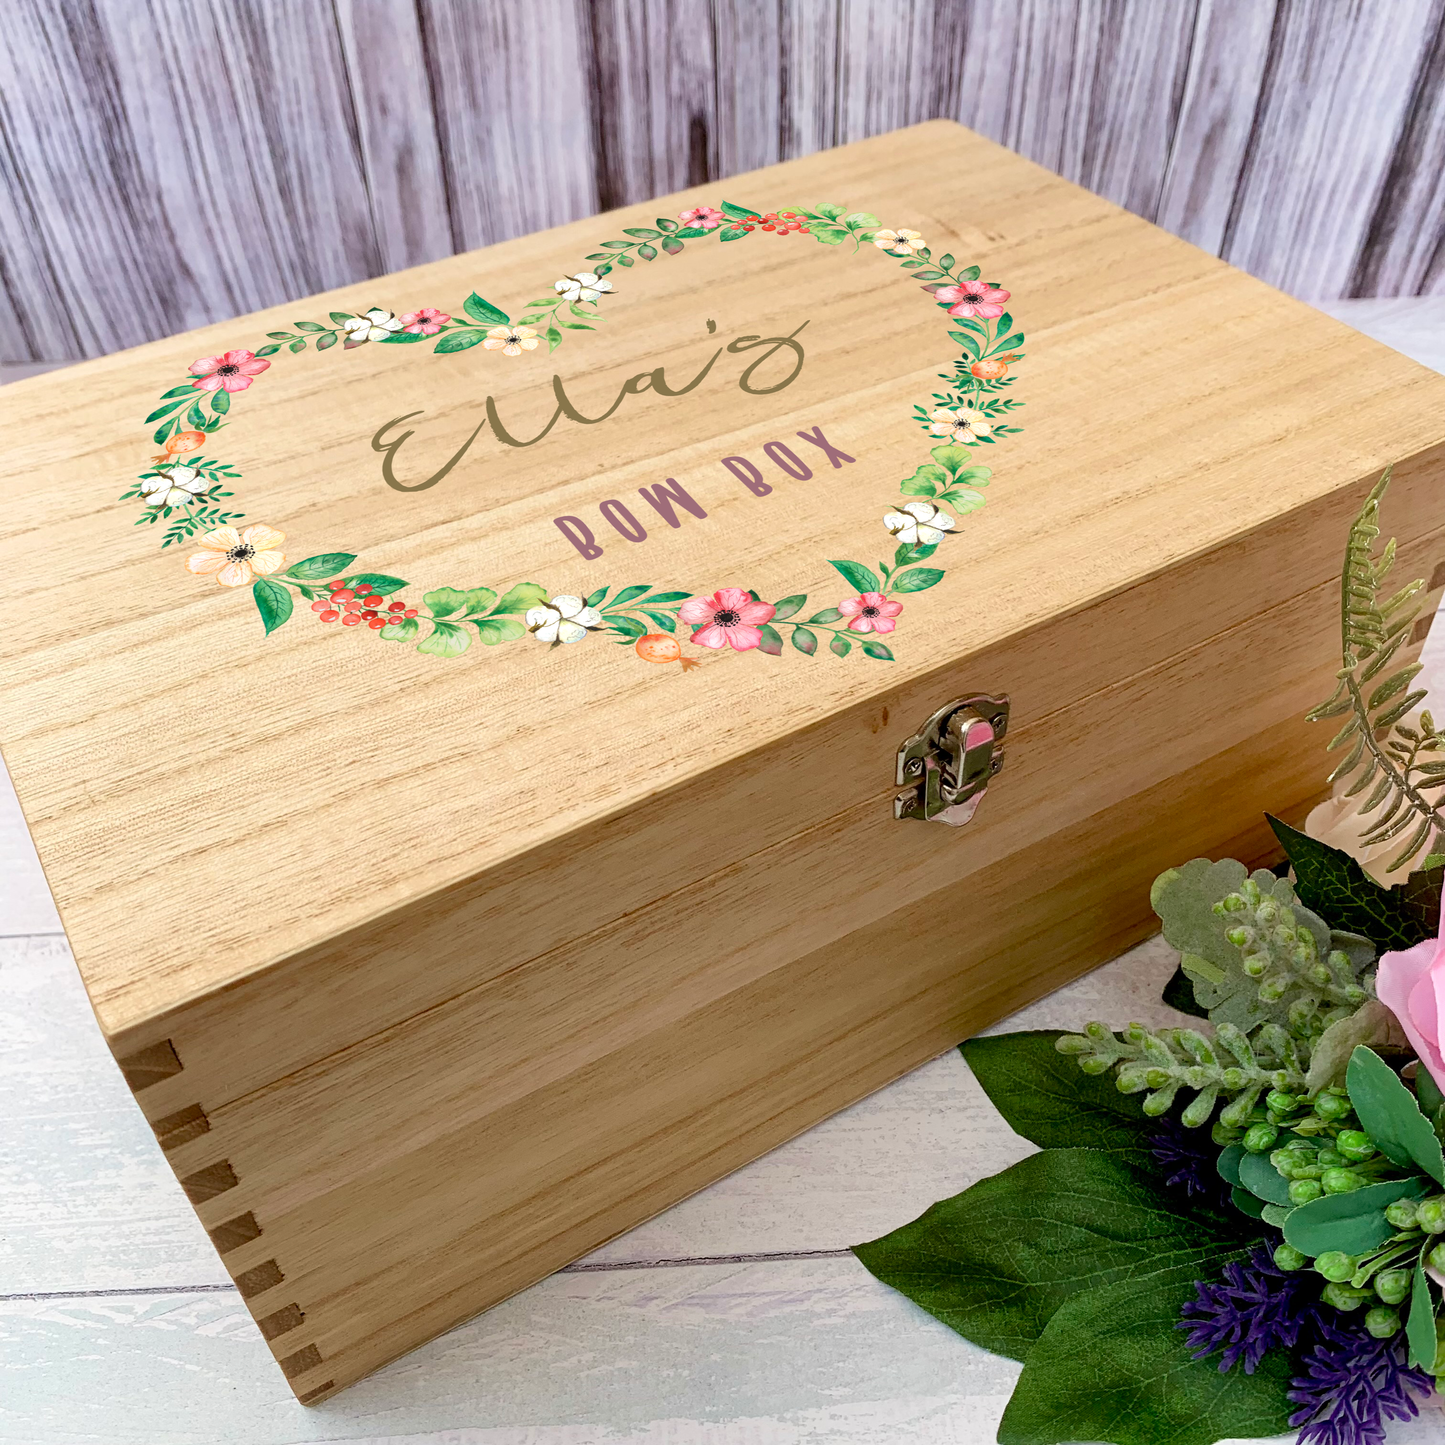 Floral Heart Bow Box, personalised wooden box